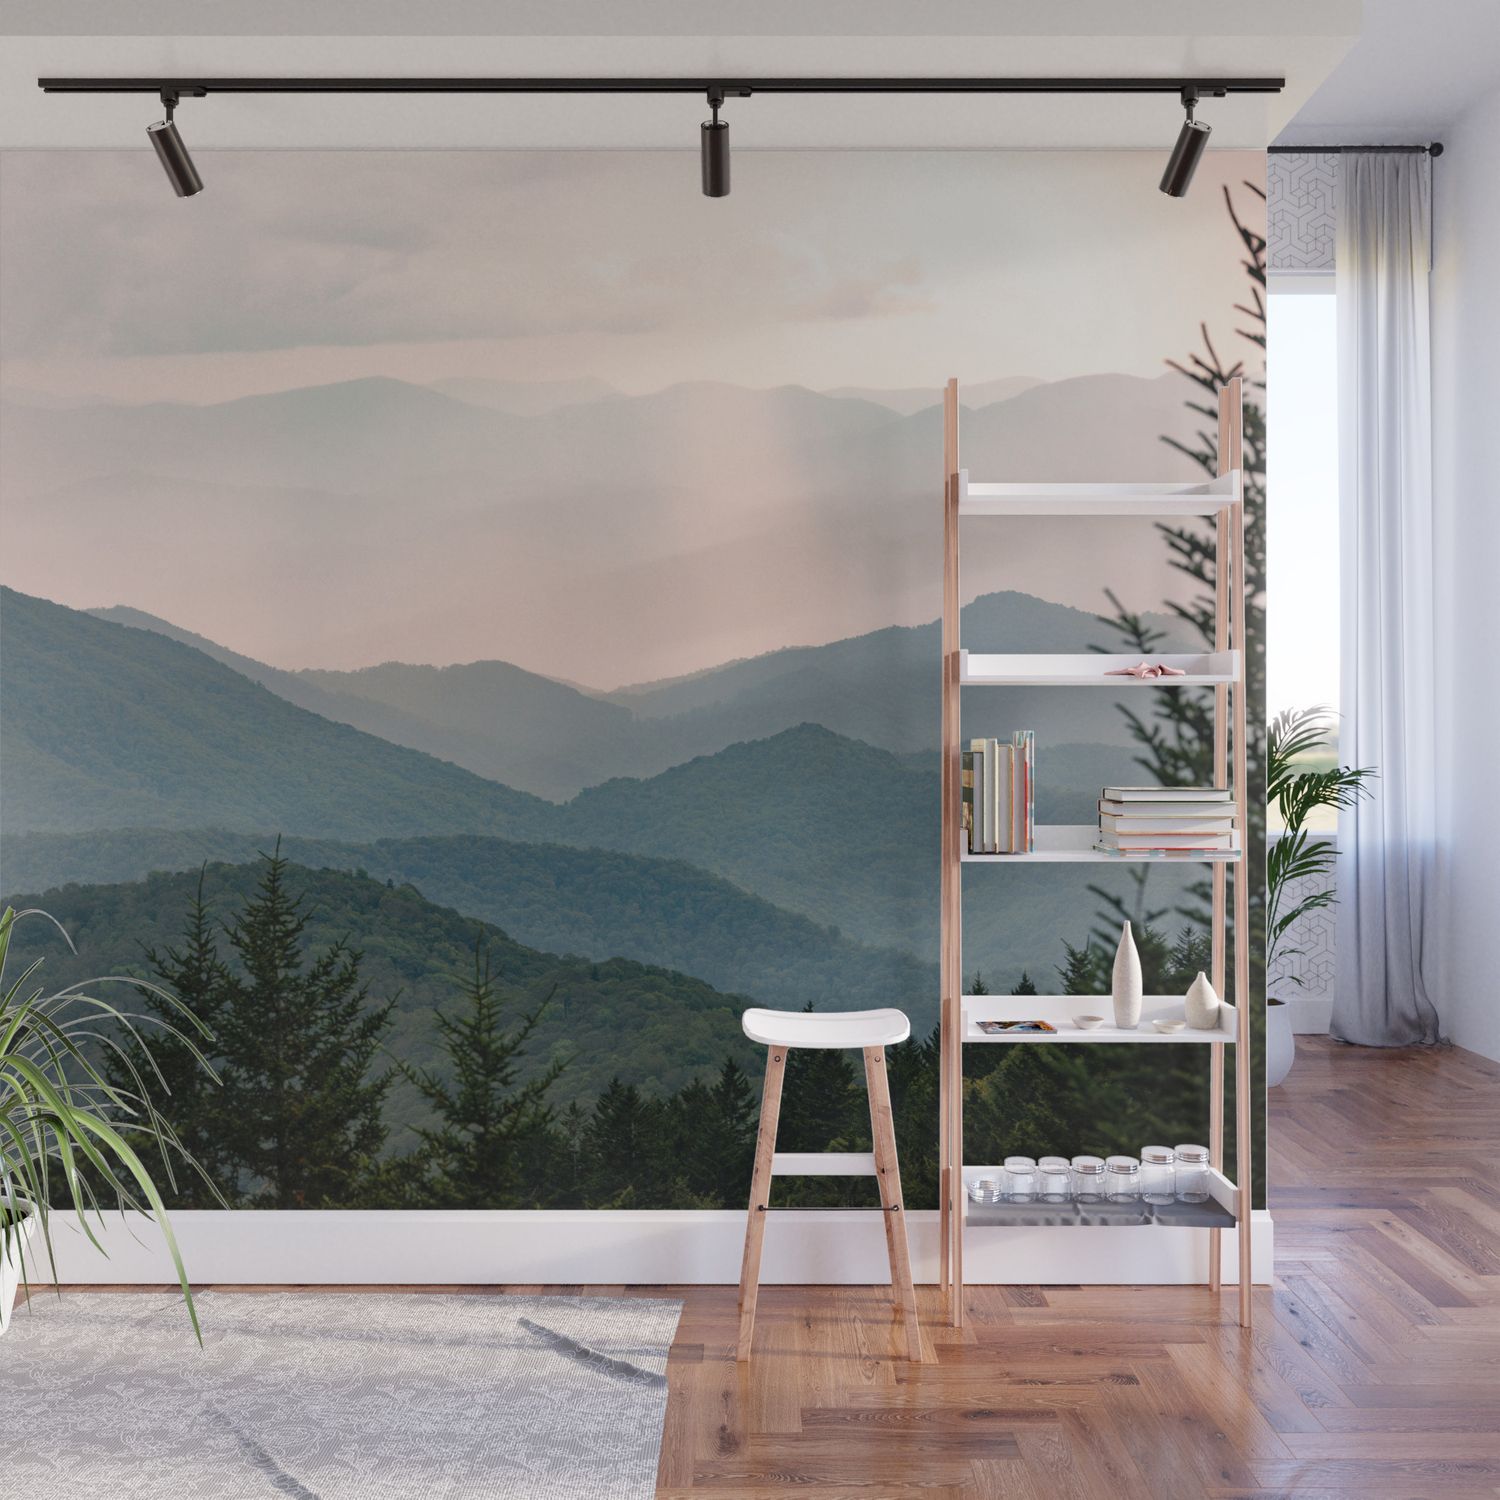 Smoky Mountain Pastel Sunset Wall Muralnature Magick Cascadia  Collection | Society6 Pertaining To Most Up To Date Smoky Mountain Wall Art (View 5 of 20)